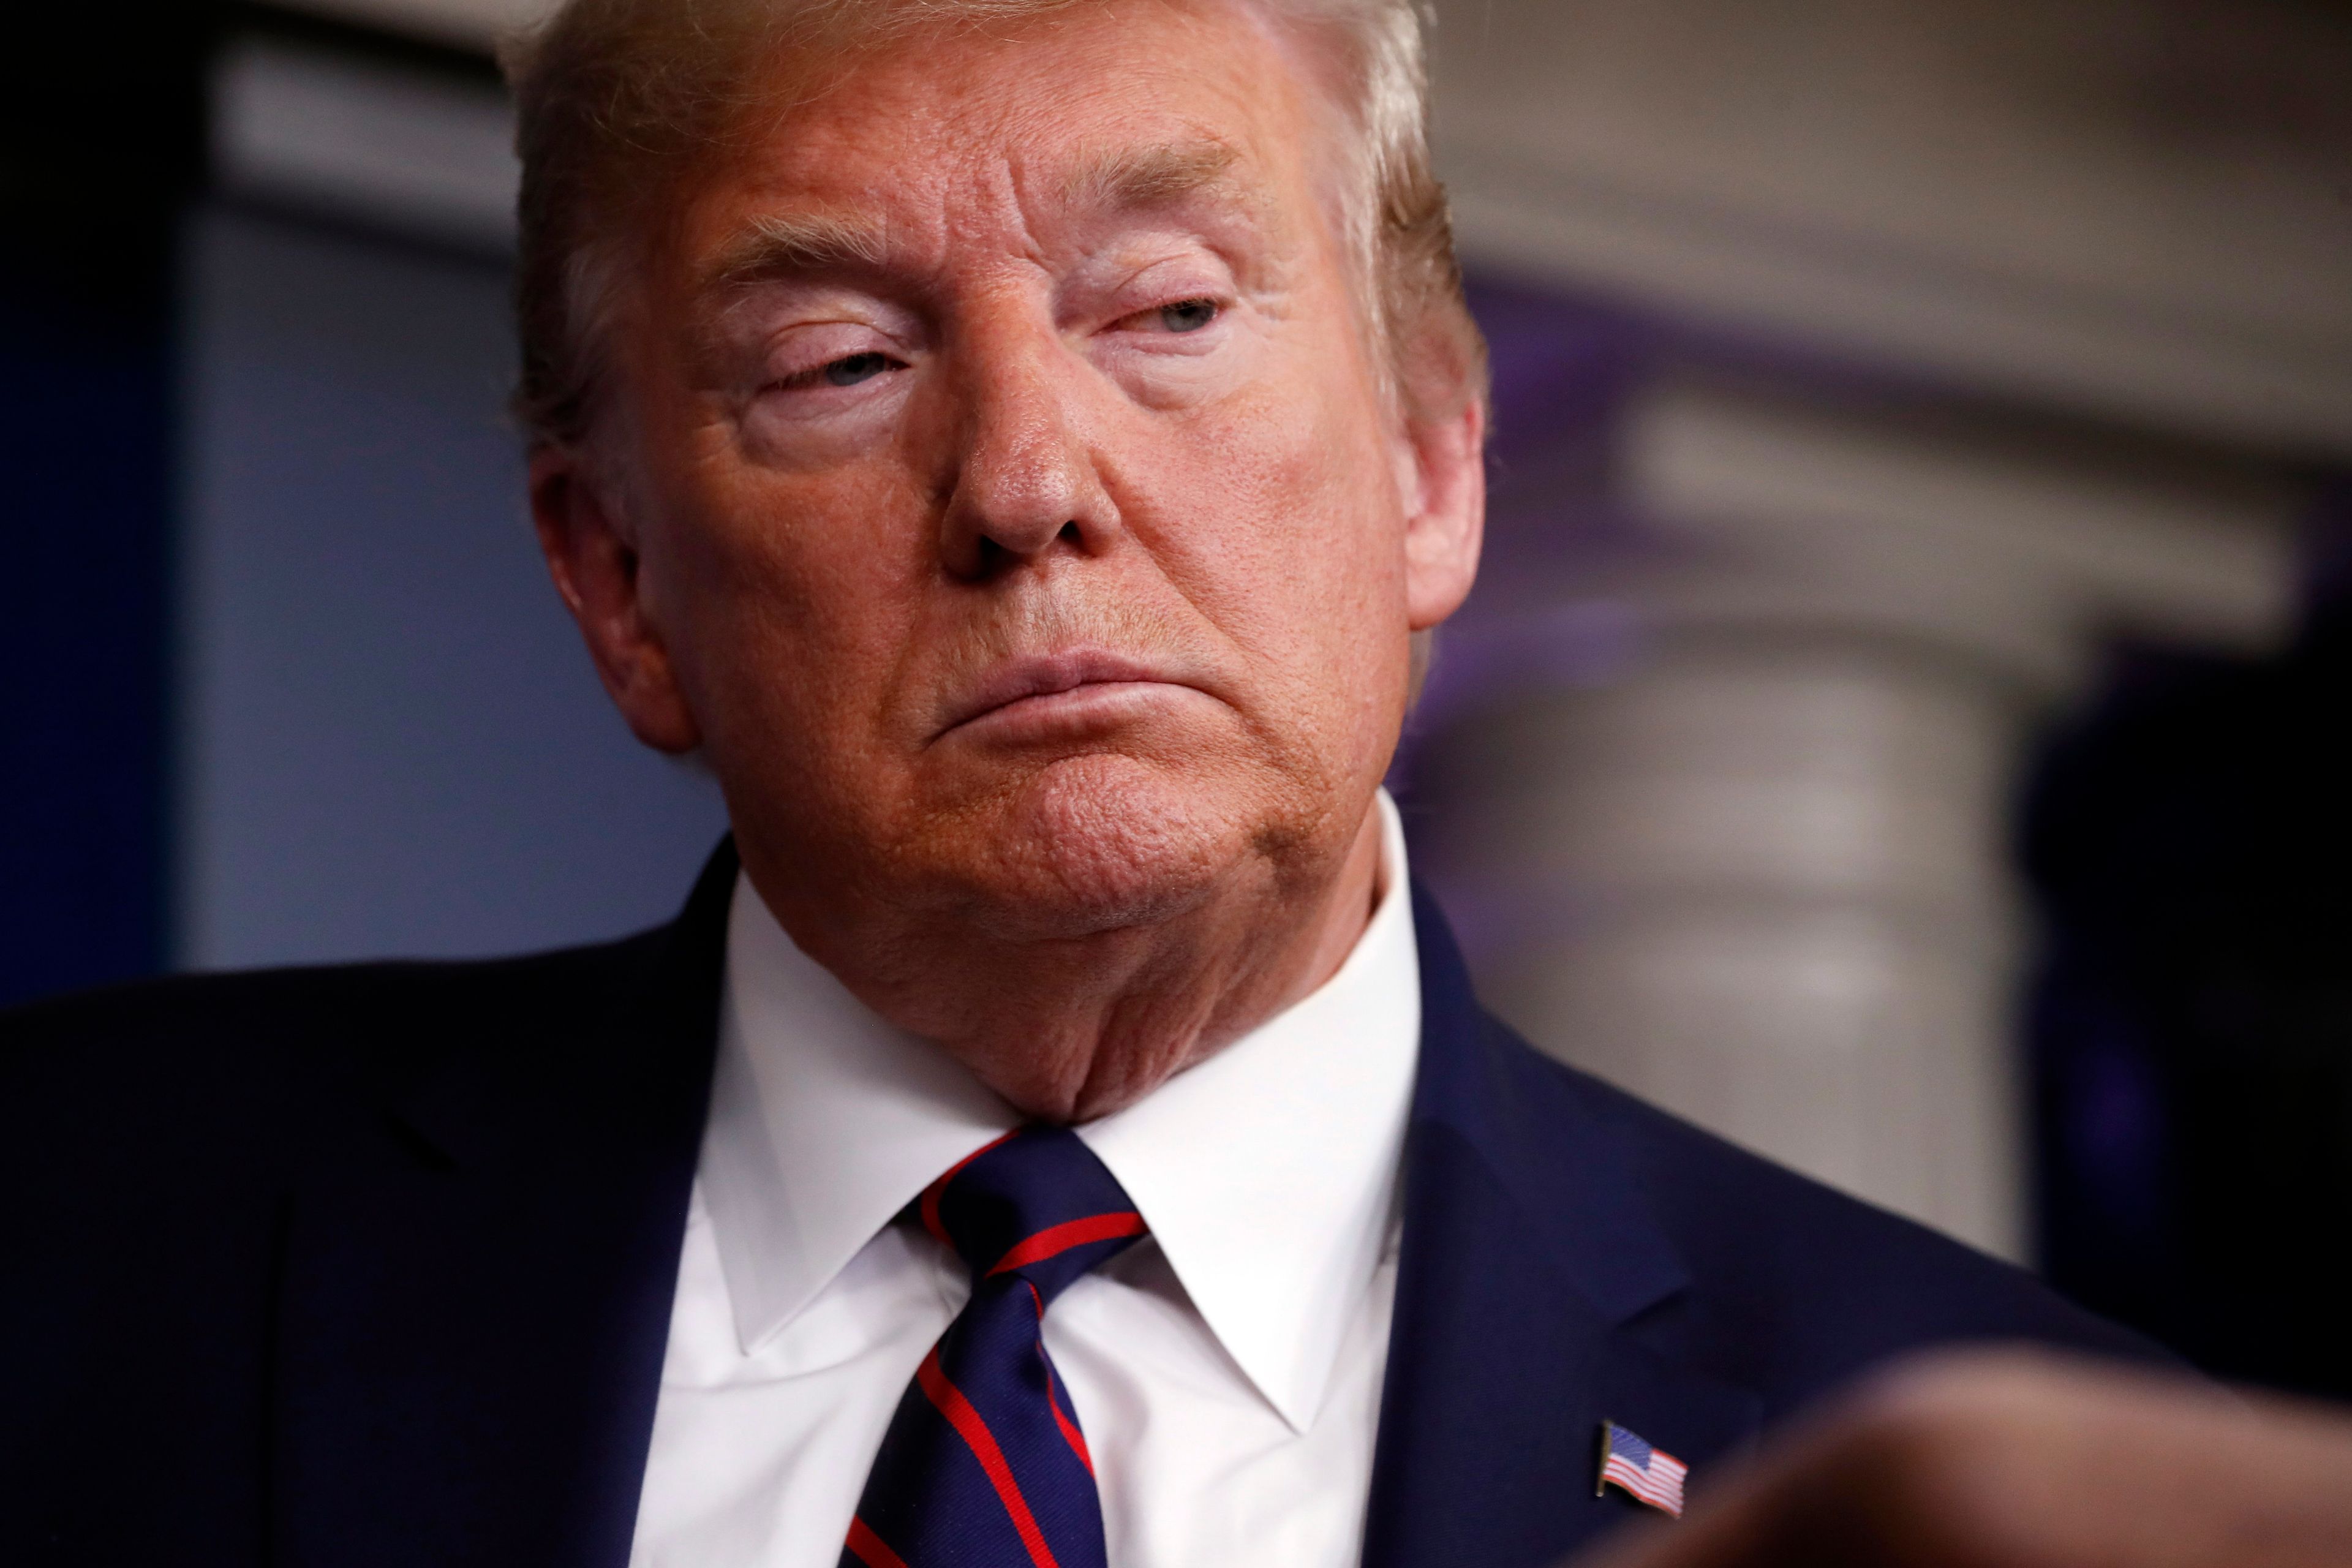 In this Mar. 27, 2020 photo, President Donald Trump listens to a question as he speaks about the coronavirus in the James Brady Press Briefing Room in Washington. (Alex Brandon/AP/CP)